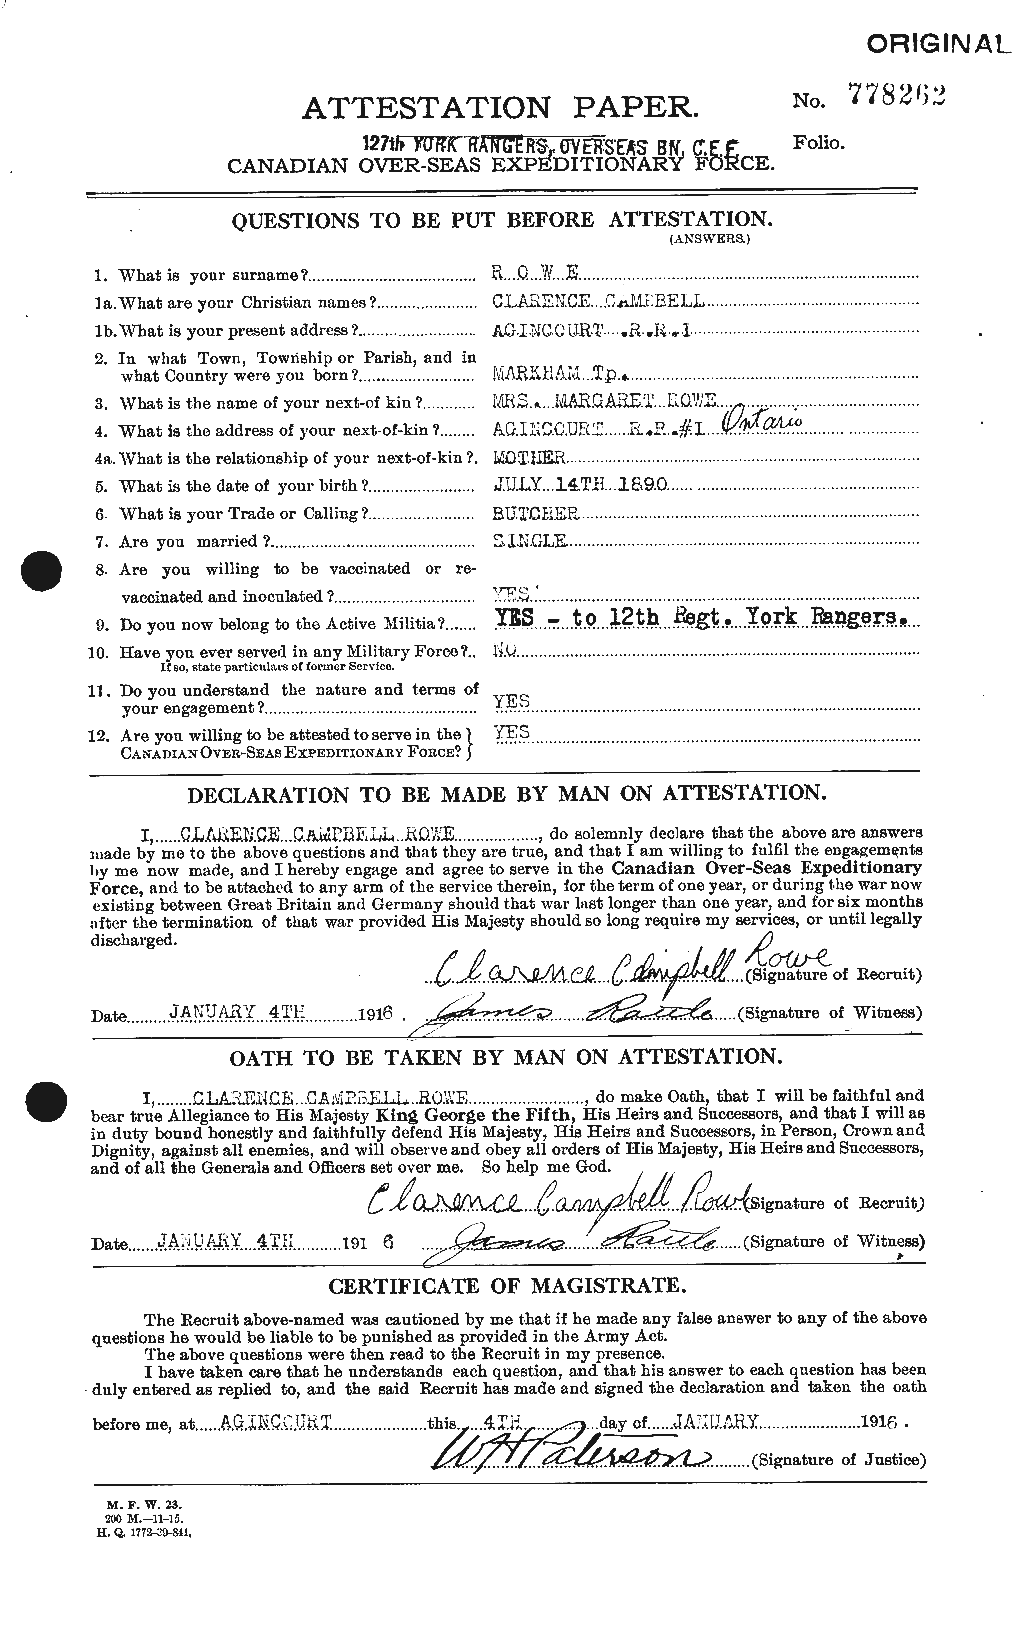 Personnel Records of the First World War - CEF 615822a